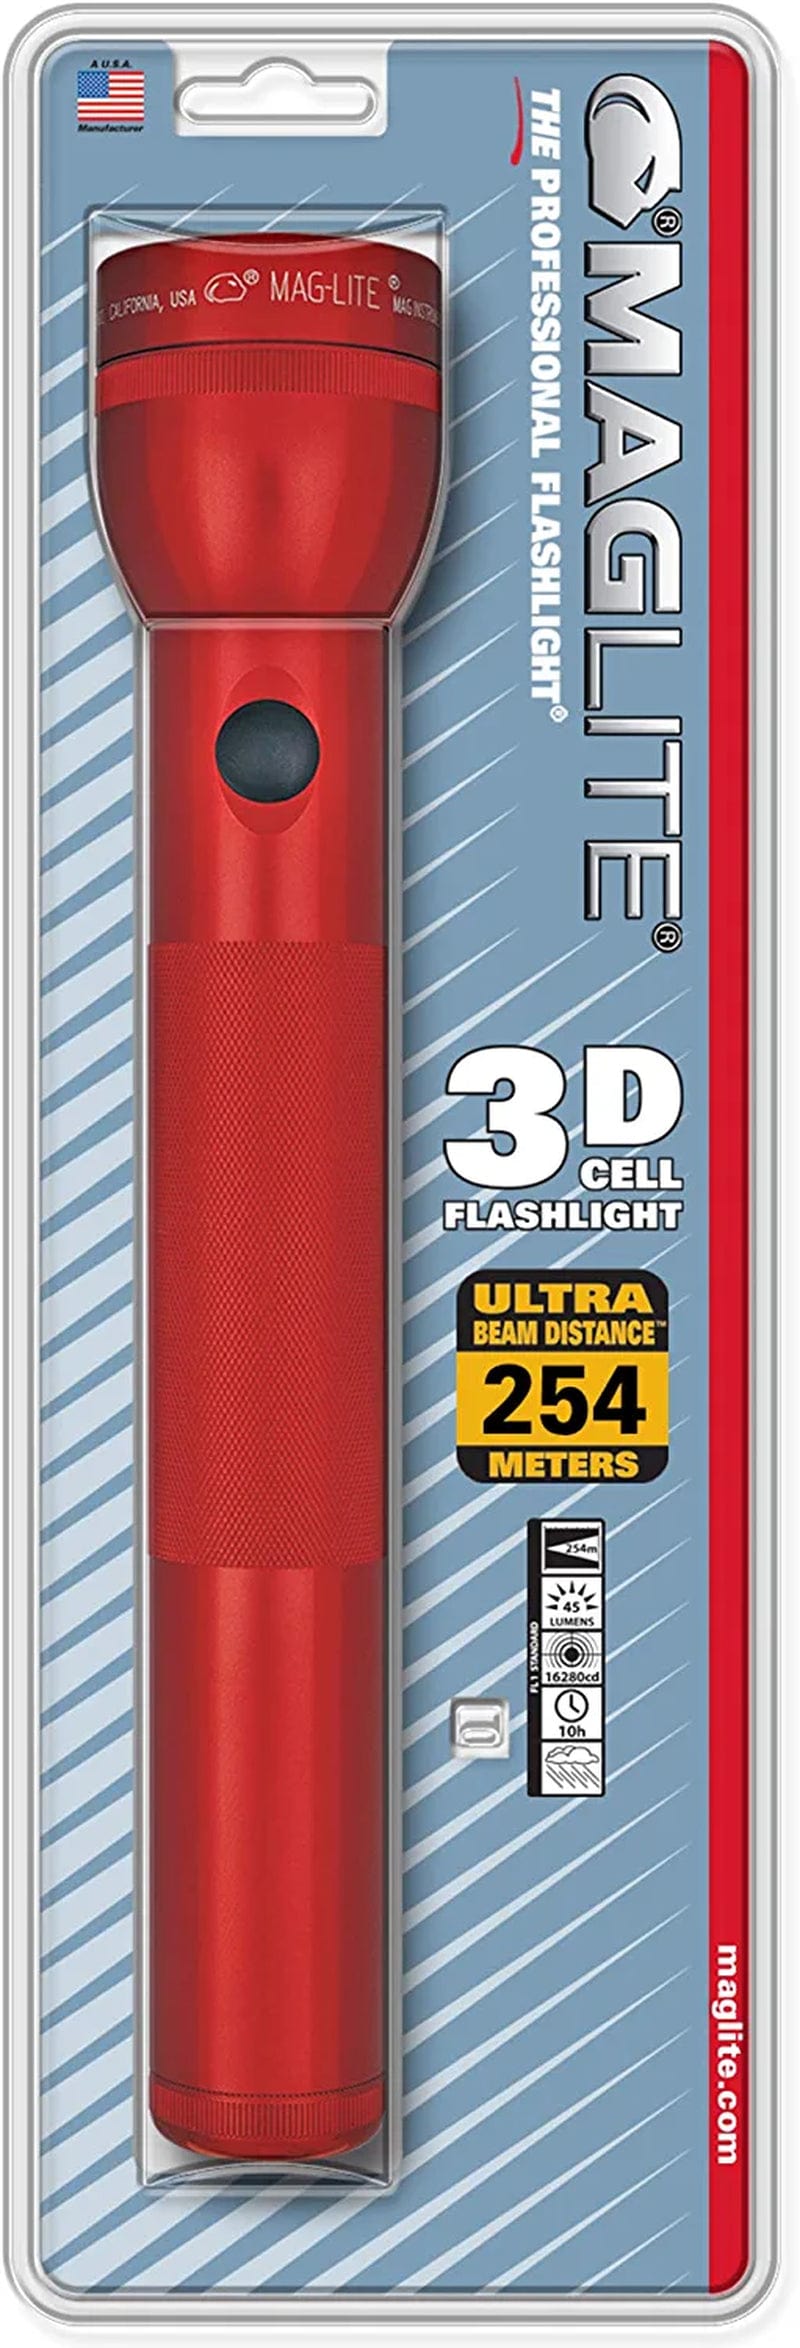 Maglite Heavy-Duty Incandescent 3-Cell D Flashlight in Display Box, Blue -S3D115 Hardware > Tools > Flashlights & Headlamps > Flashlights MAGLITE Red Flashlight 3 Cell in Blister Pack